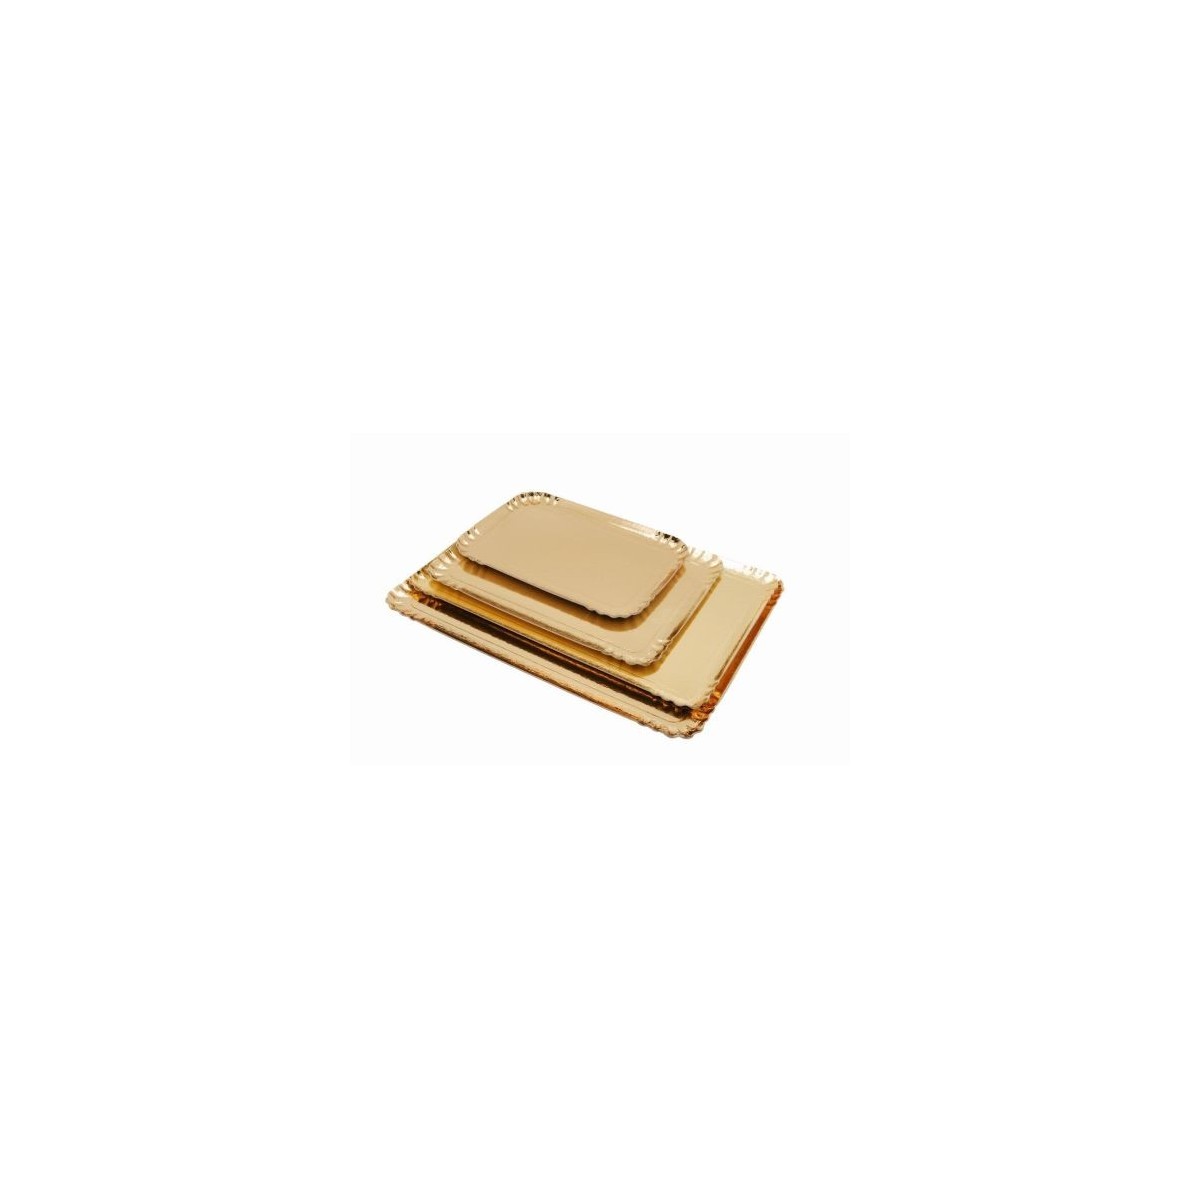 CARDBOARD TRAY RECTANGULAR GOLD 19X28CM 200 PIECES FOSTPLUS INCLUDED  BOX 